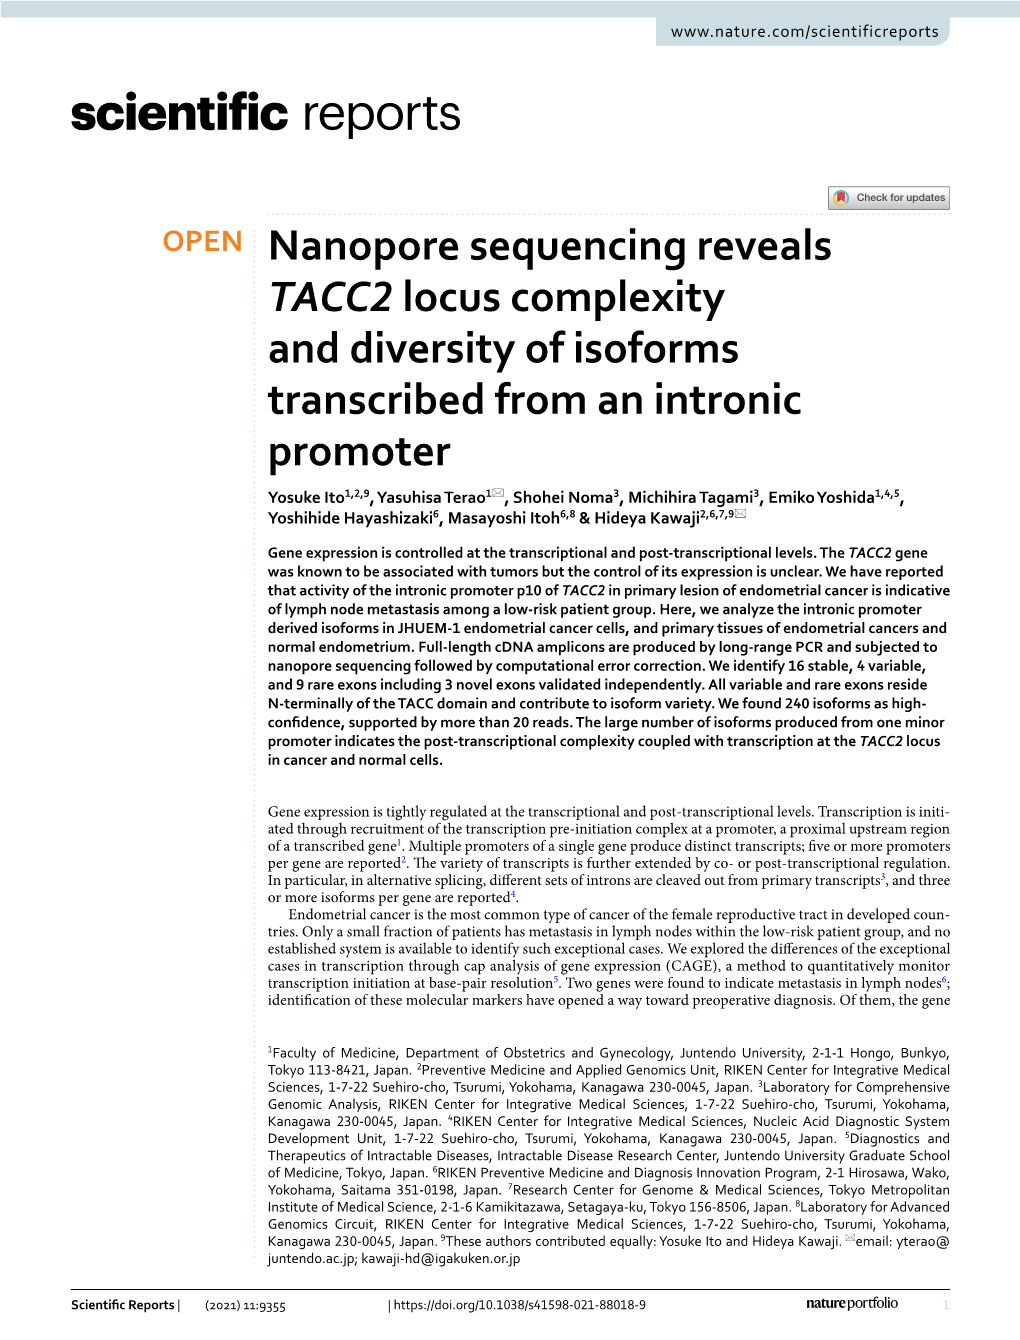 Nanopore Sequencing Reveals TACC2 Locus Complexity and Diversity of Isoforms Transcribed from an Intronic Promoter